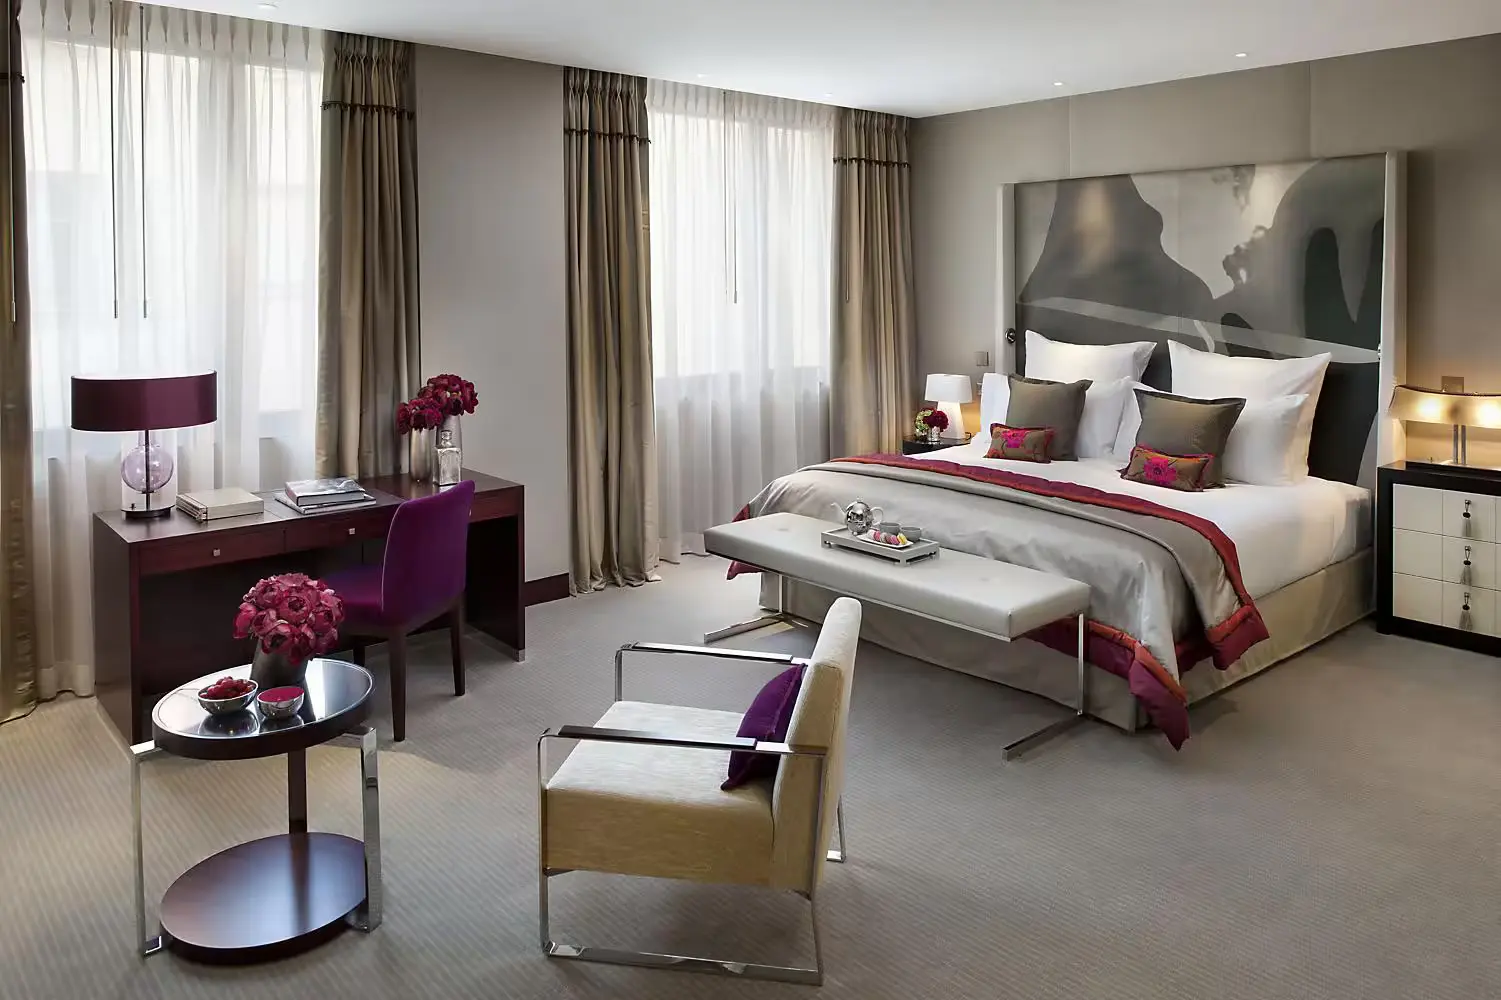 Modern and chic bedroom at the Mandarin Oriental, a green hotel in Paris, showcasing a blend of comfort and style with a plush bed, contemporary furniture, and accents of vibrant purple.